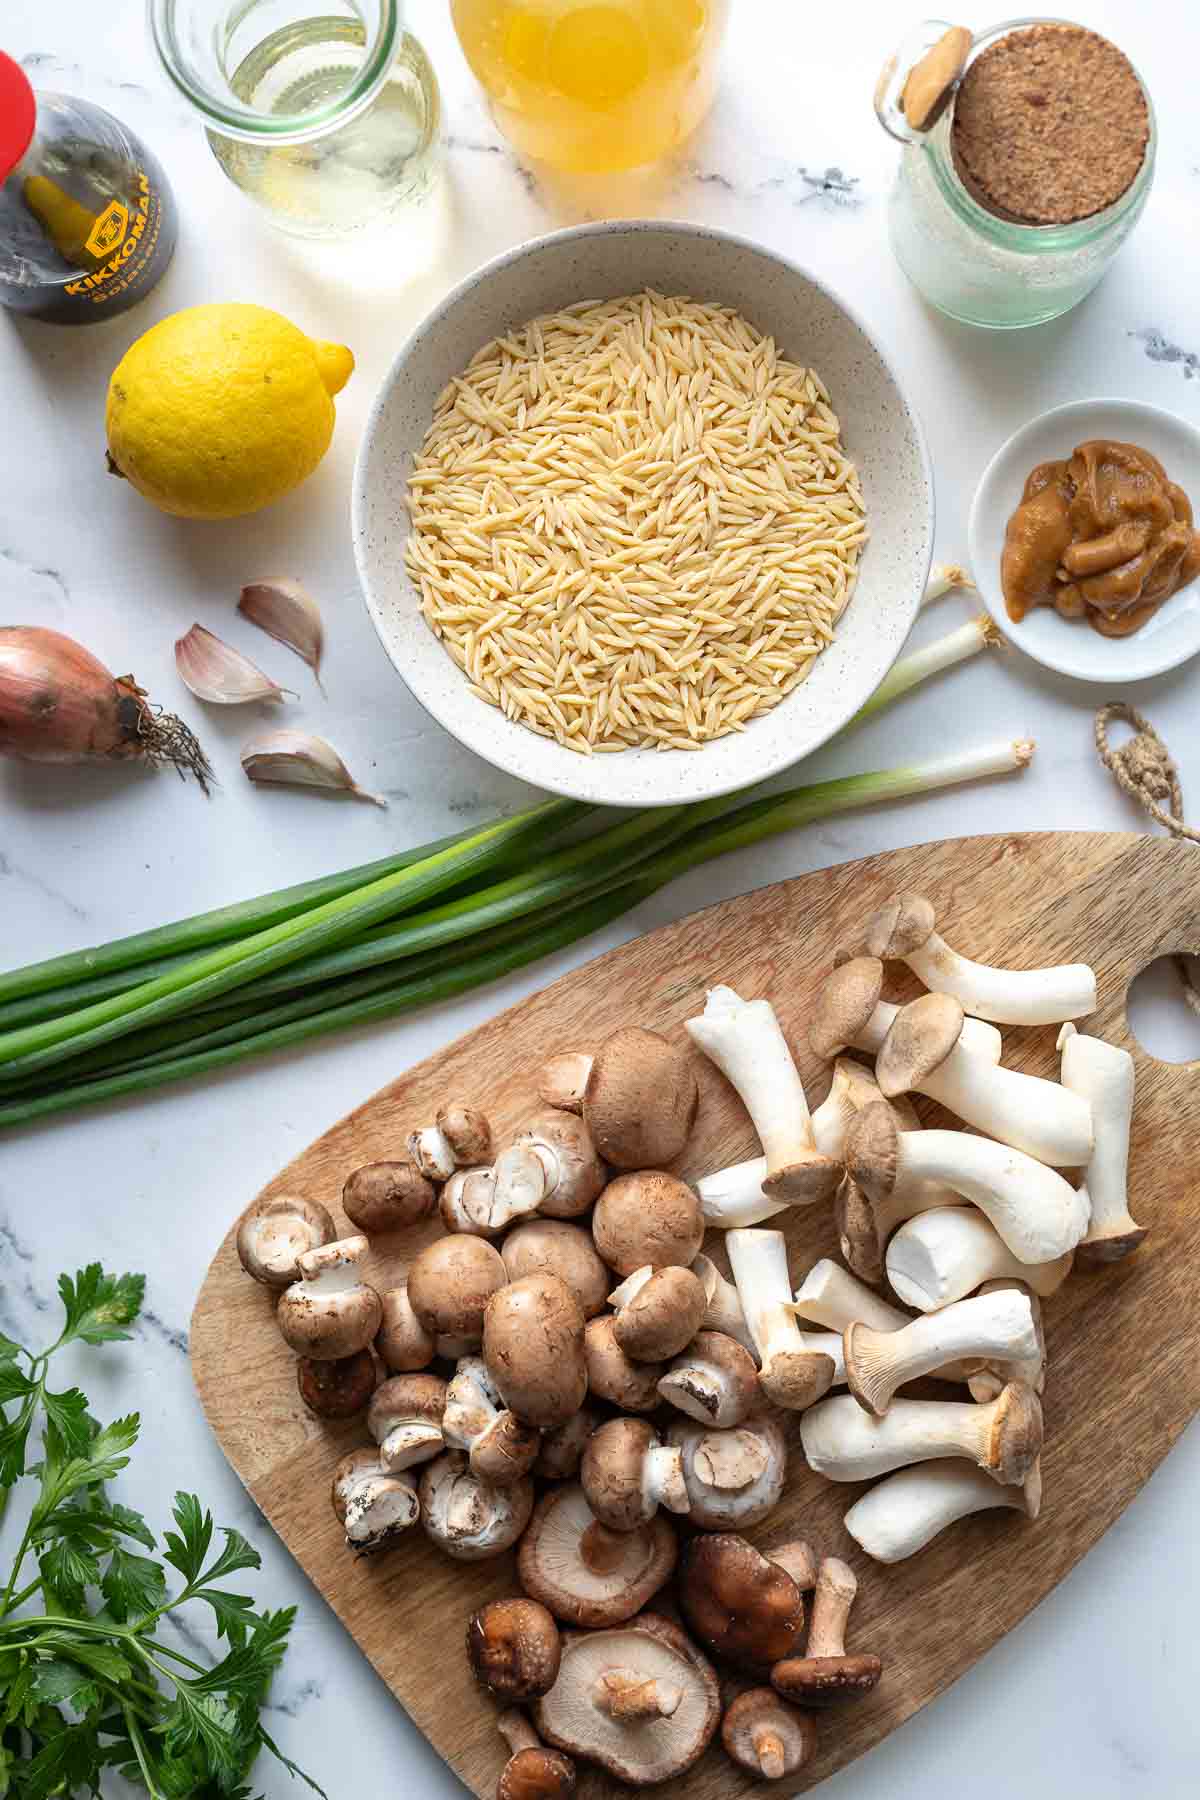 Recipe ingredients for Orzo with mushrooms, miso and soy sauce